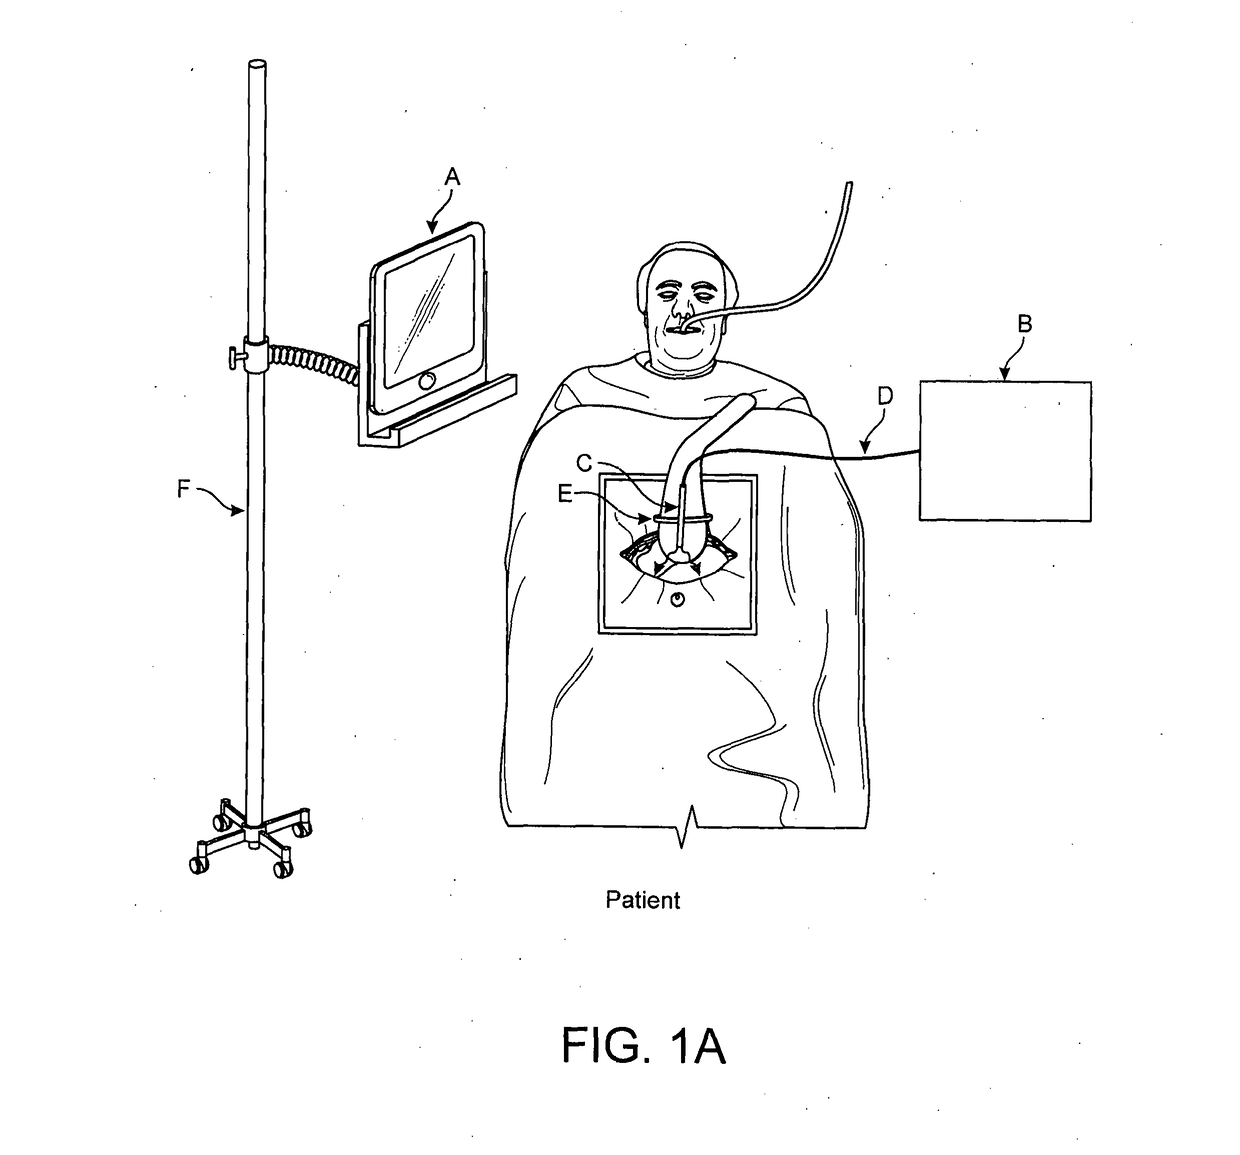 Apparatus for Clinical Use